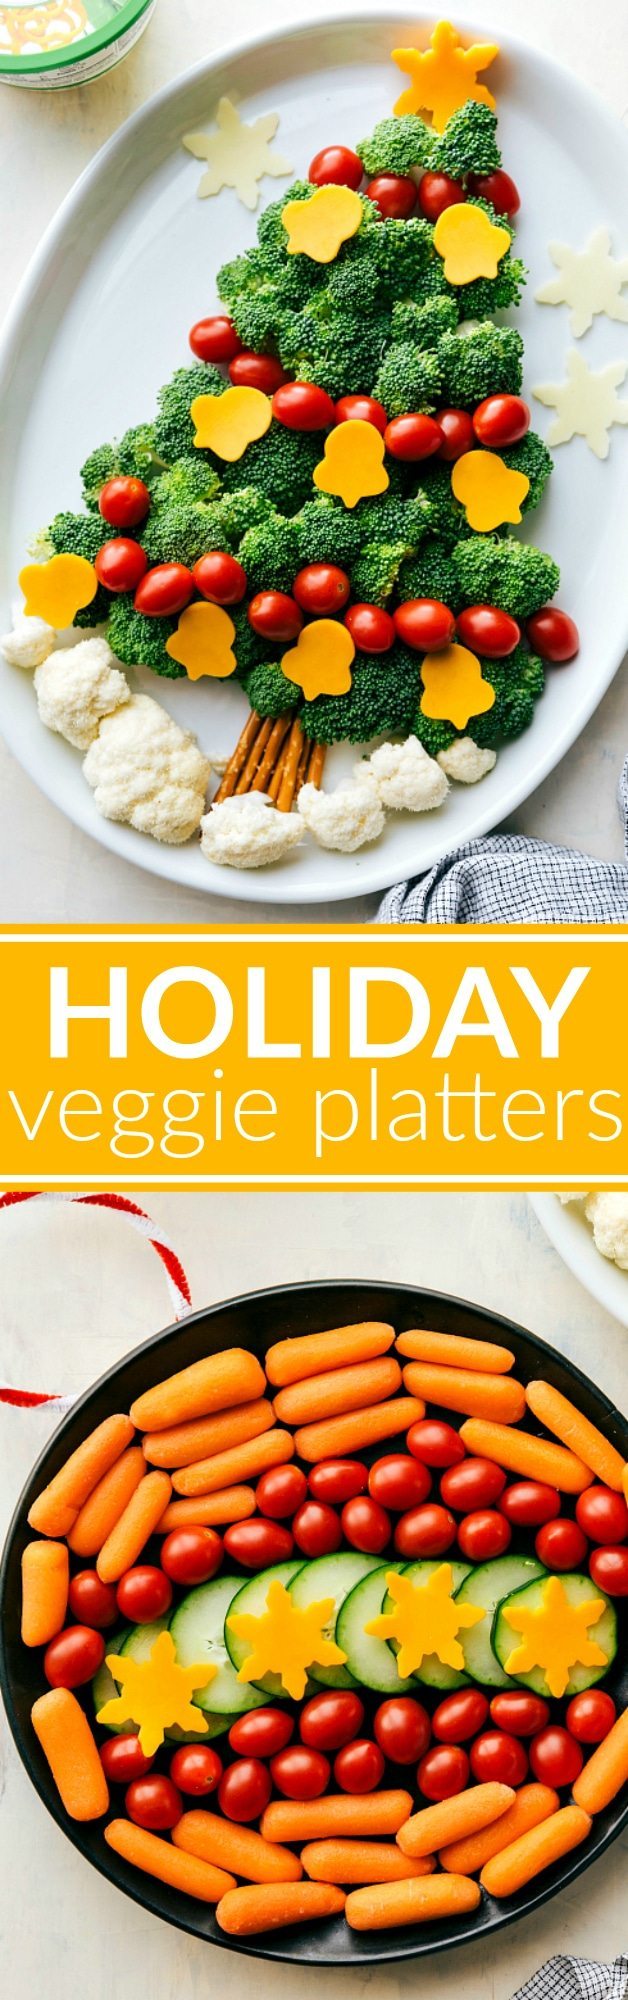 EASY Holiday Veggie Platters!! Two easy ways to dress up your holiday veggie platters! A Christmas Tree and an Ornament made out of veggies with delicious dips! via chelseasmessyapron.com